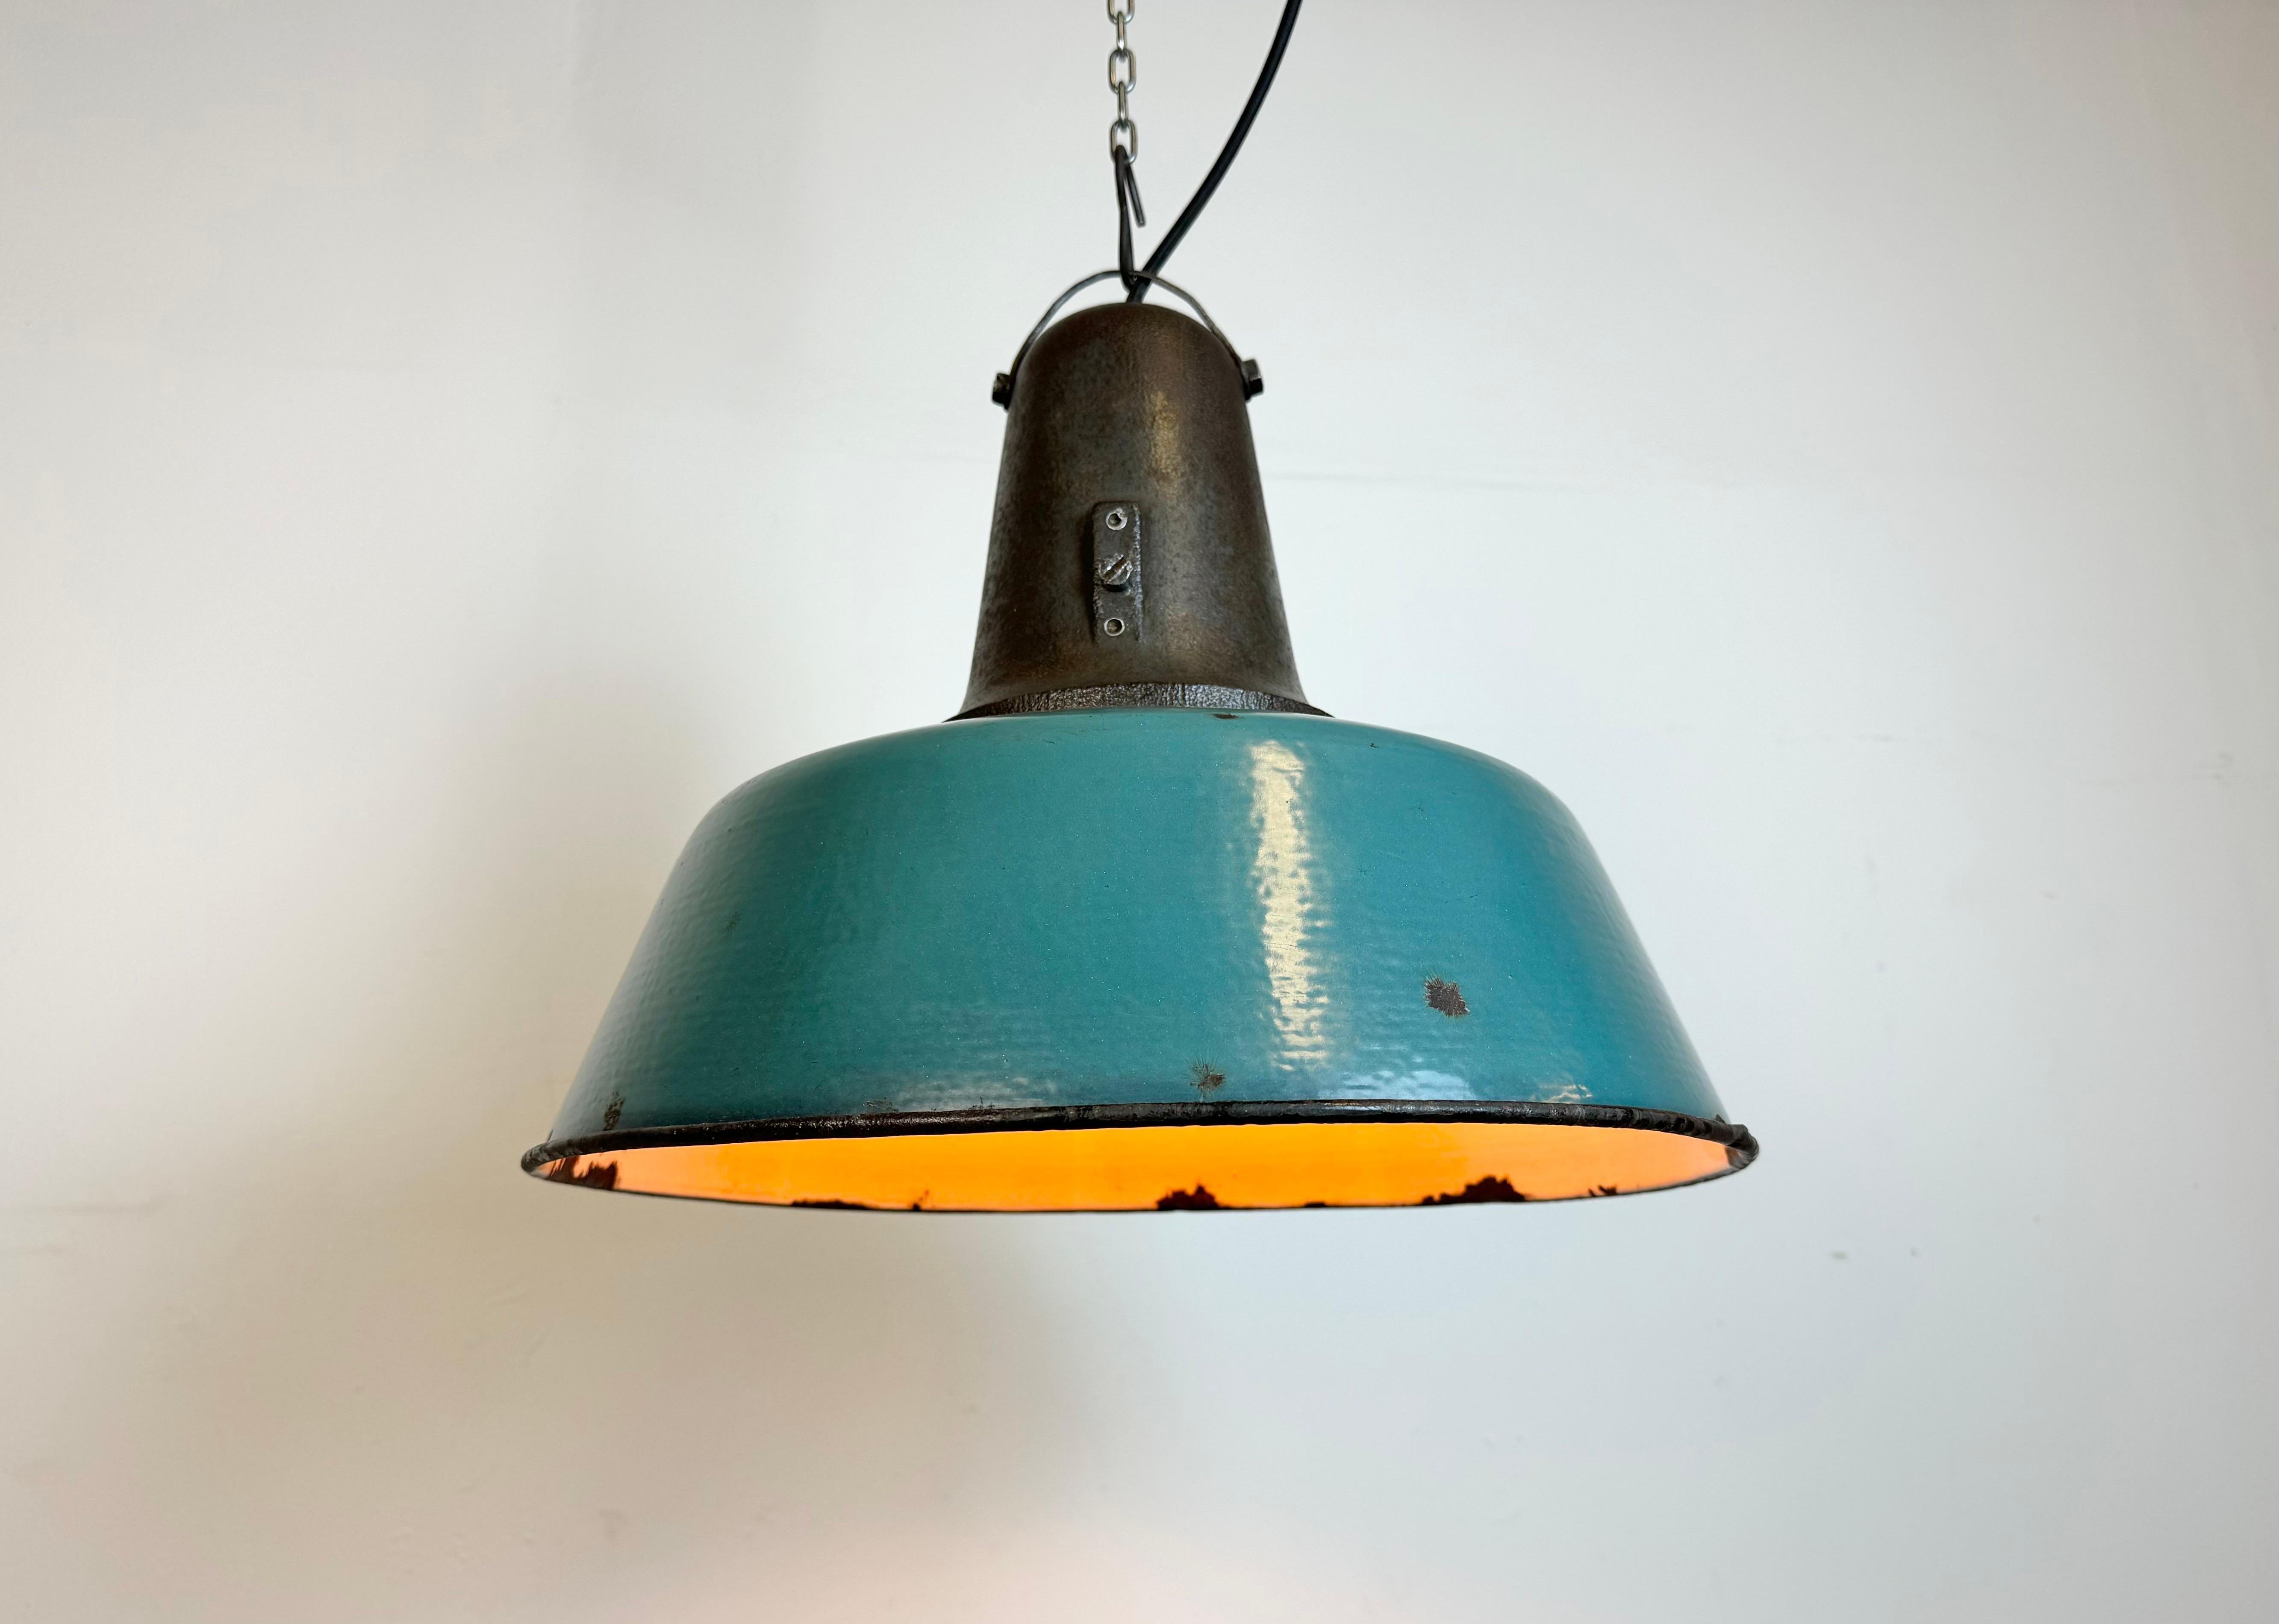 Large Industrial Petrol Enamel Factory Lamp with Cast Iron Top, 1960s For Sale 5